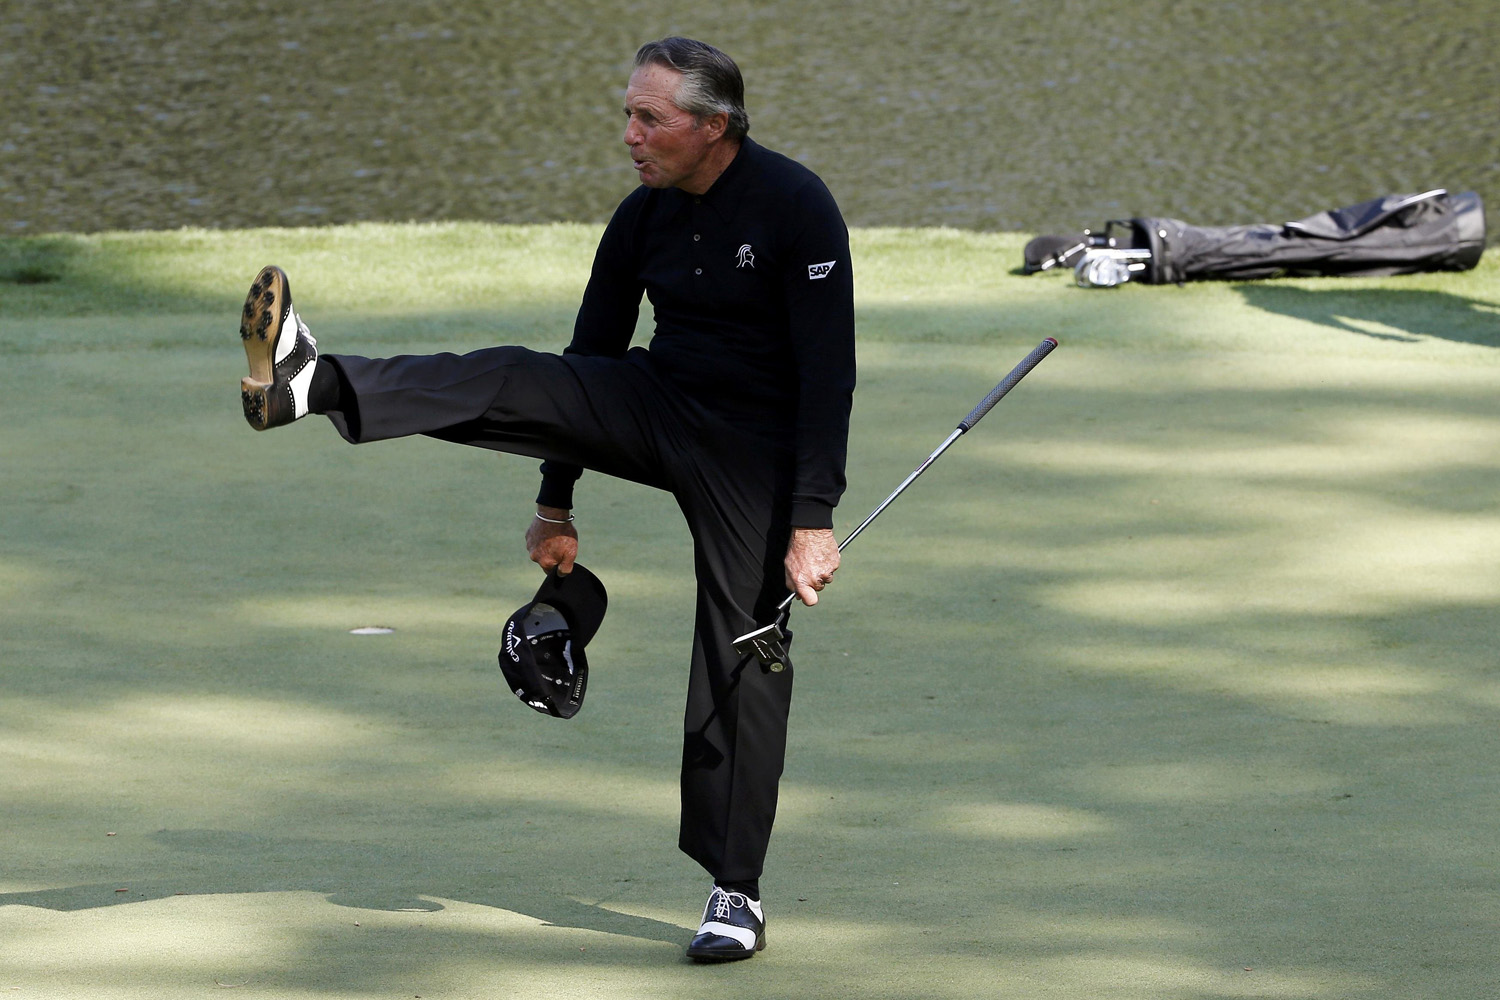 Former Masters champion Gary Player of South Africa reacts after a putt on the ninth hole during the Par 3 Contest at the Augusta National Golf Club in Augusta